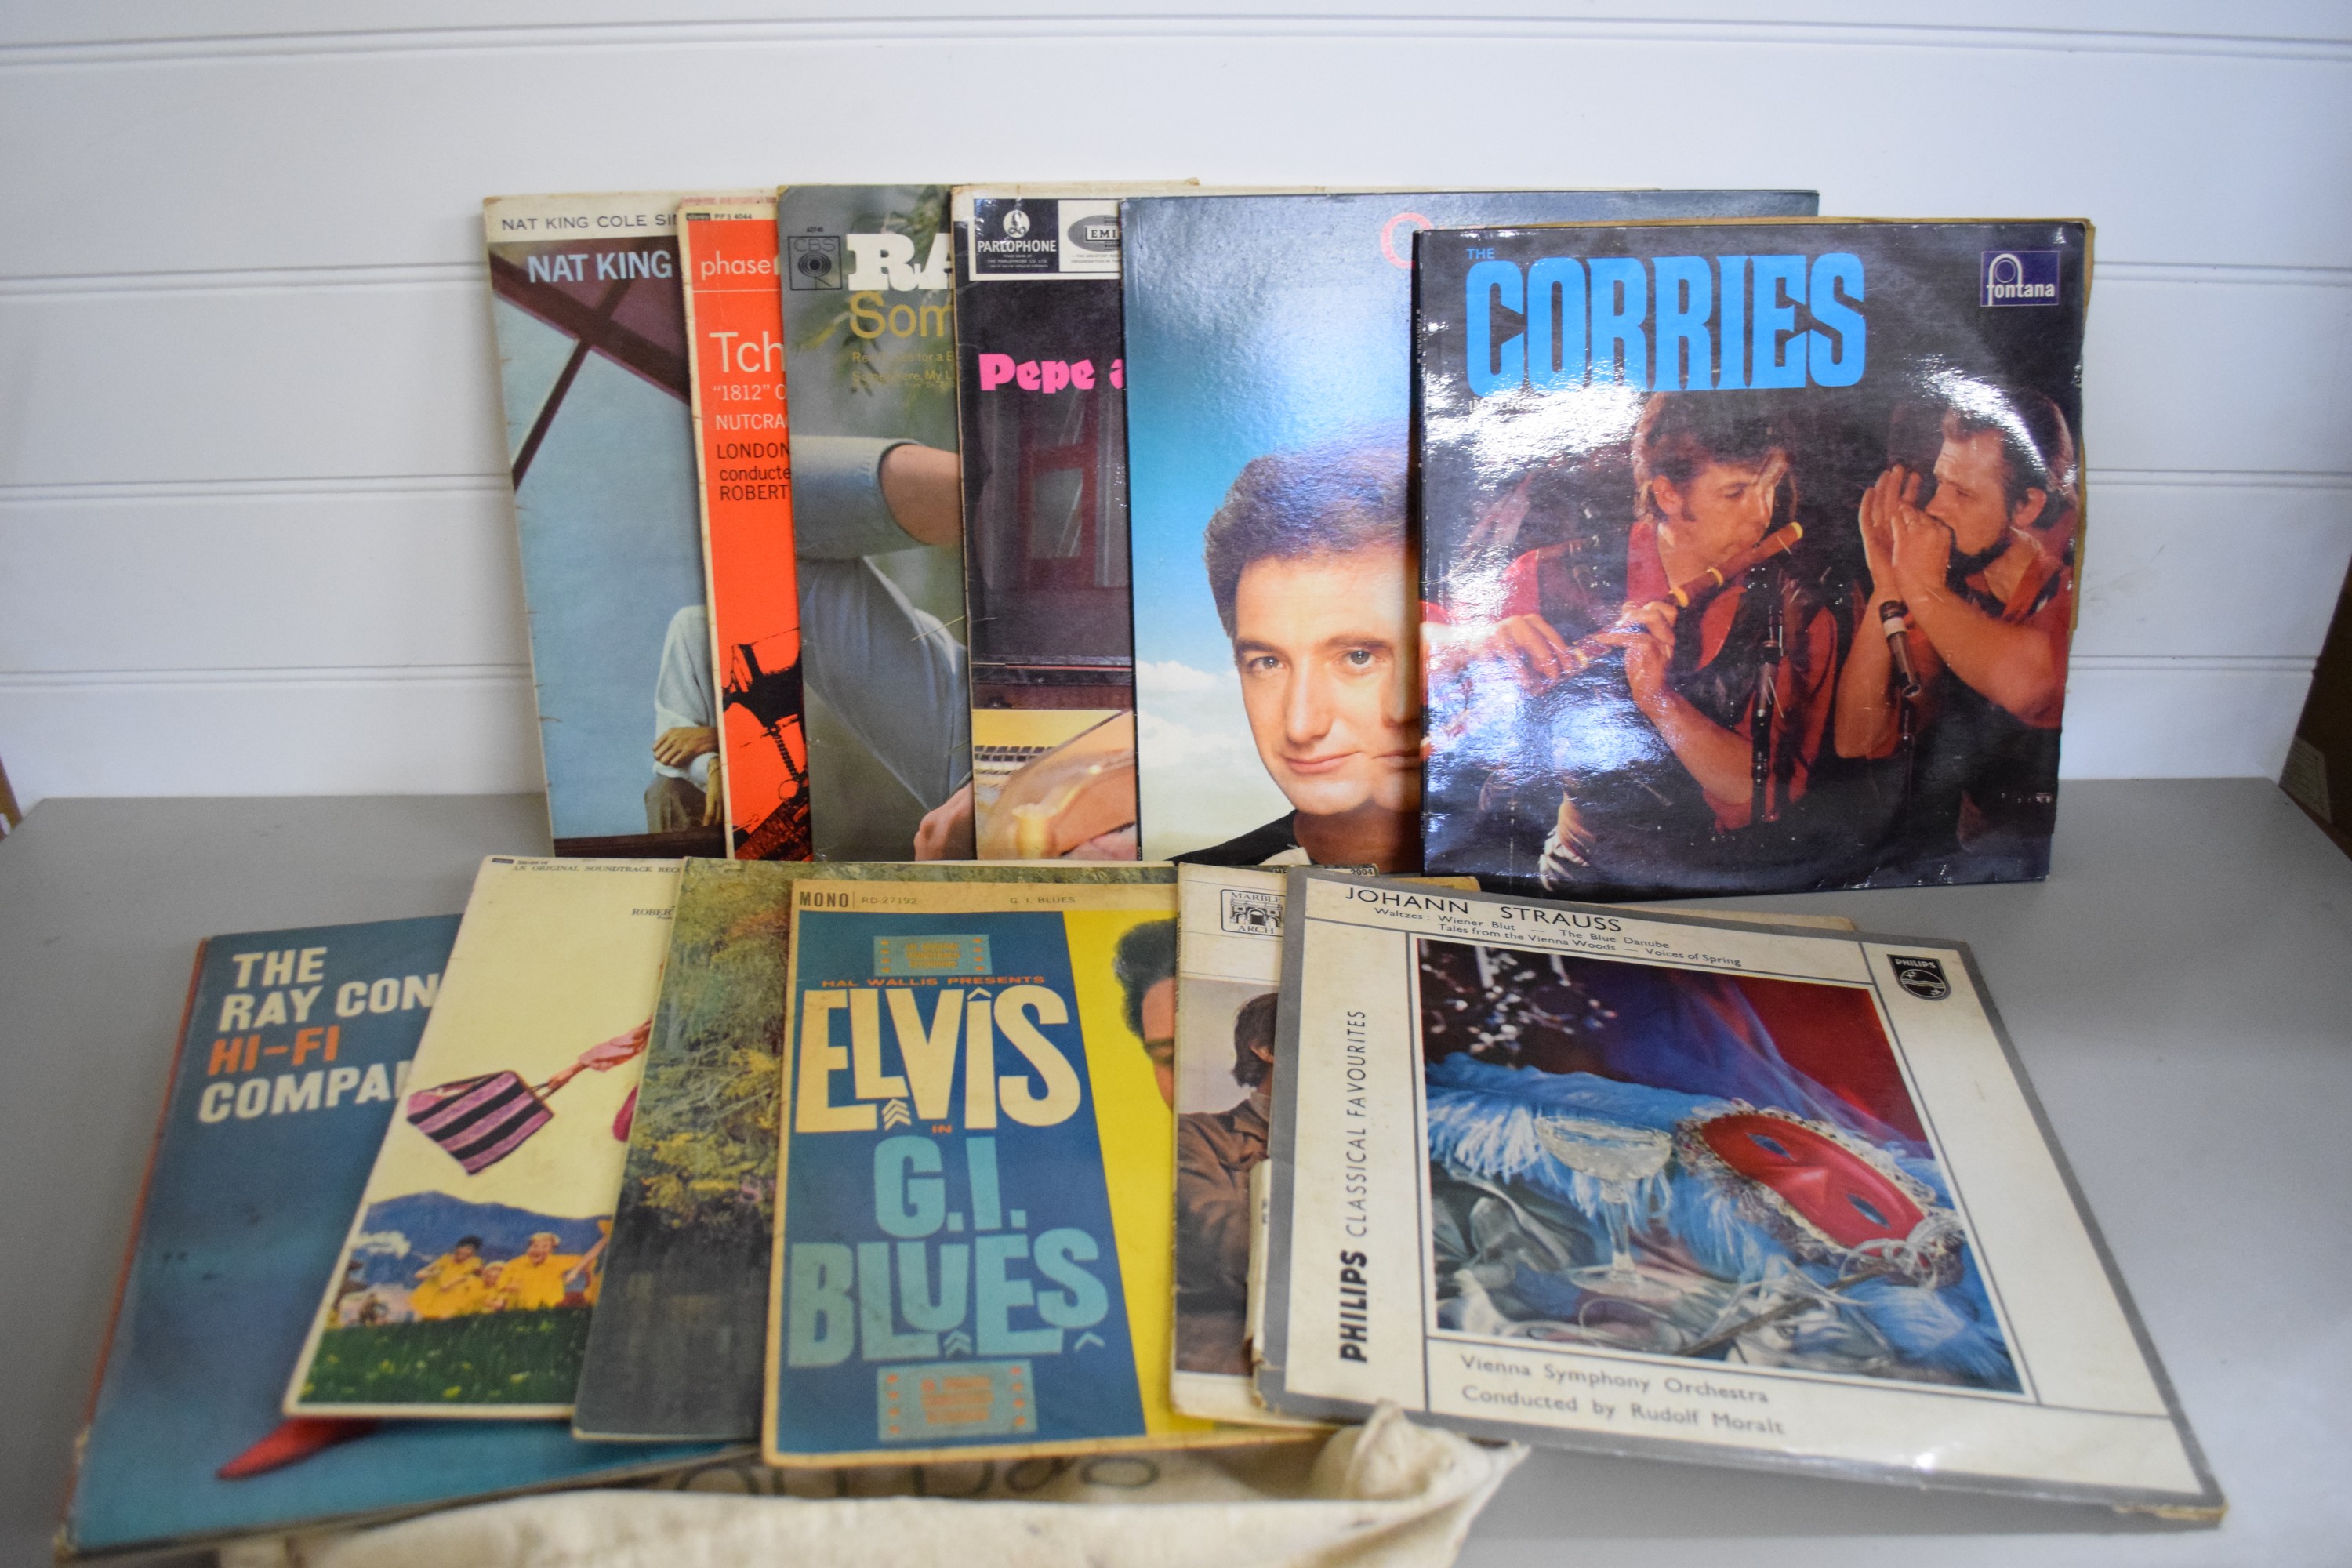 BAG CONTAINING CLASSICAL AND EASY LISTENING MUSIC LP RECORDS, ELVIS PRESLEY, G I BLUES ETC